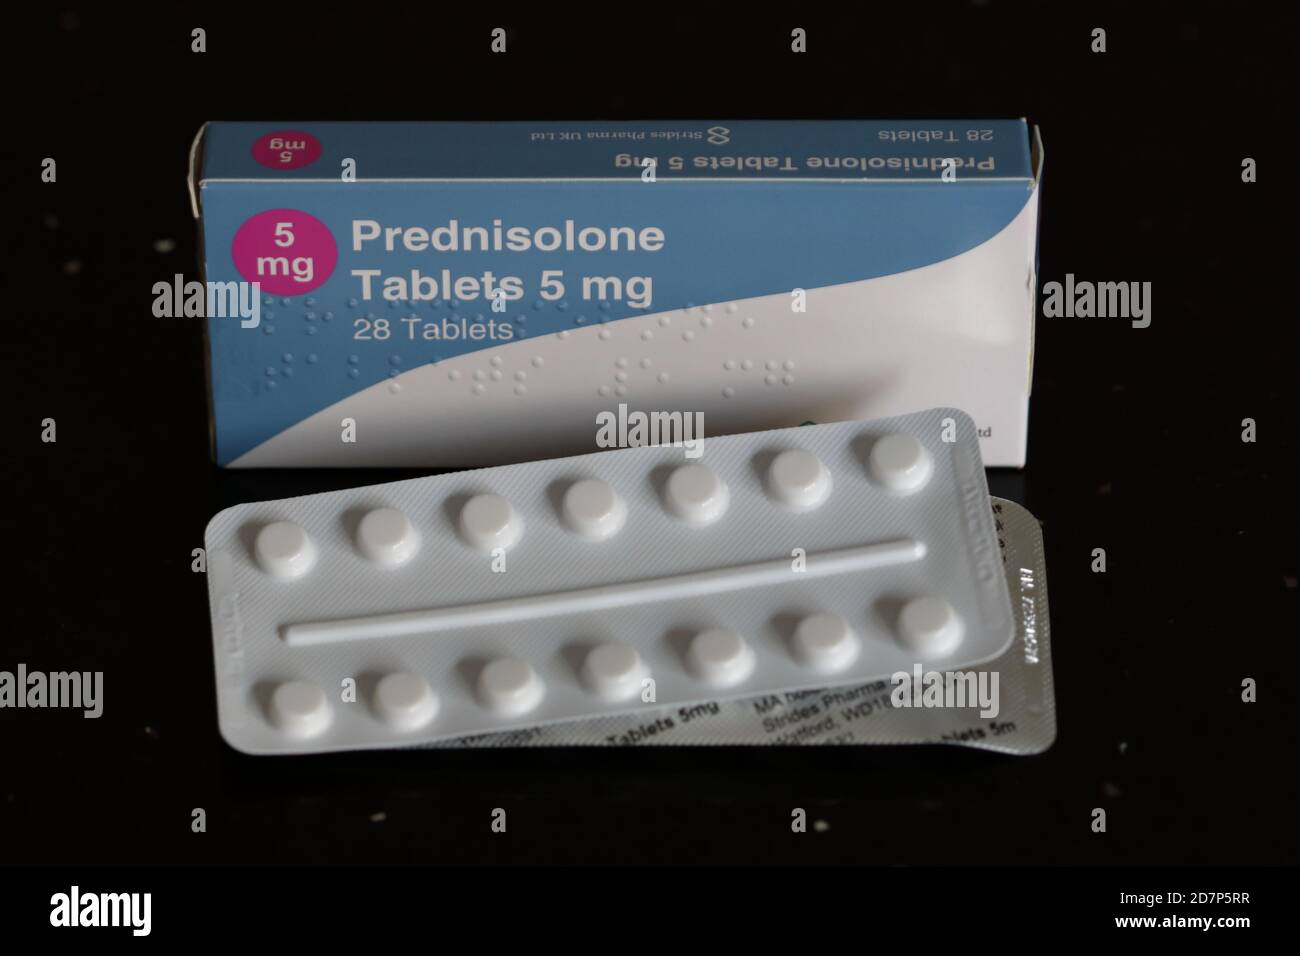 A box of Prednisolone (5 milligram) tablets and blister pack Stock Photo